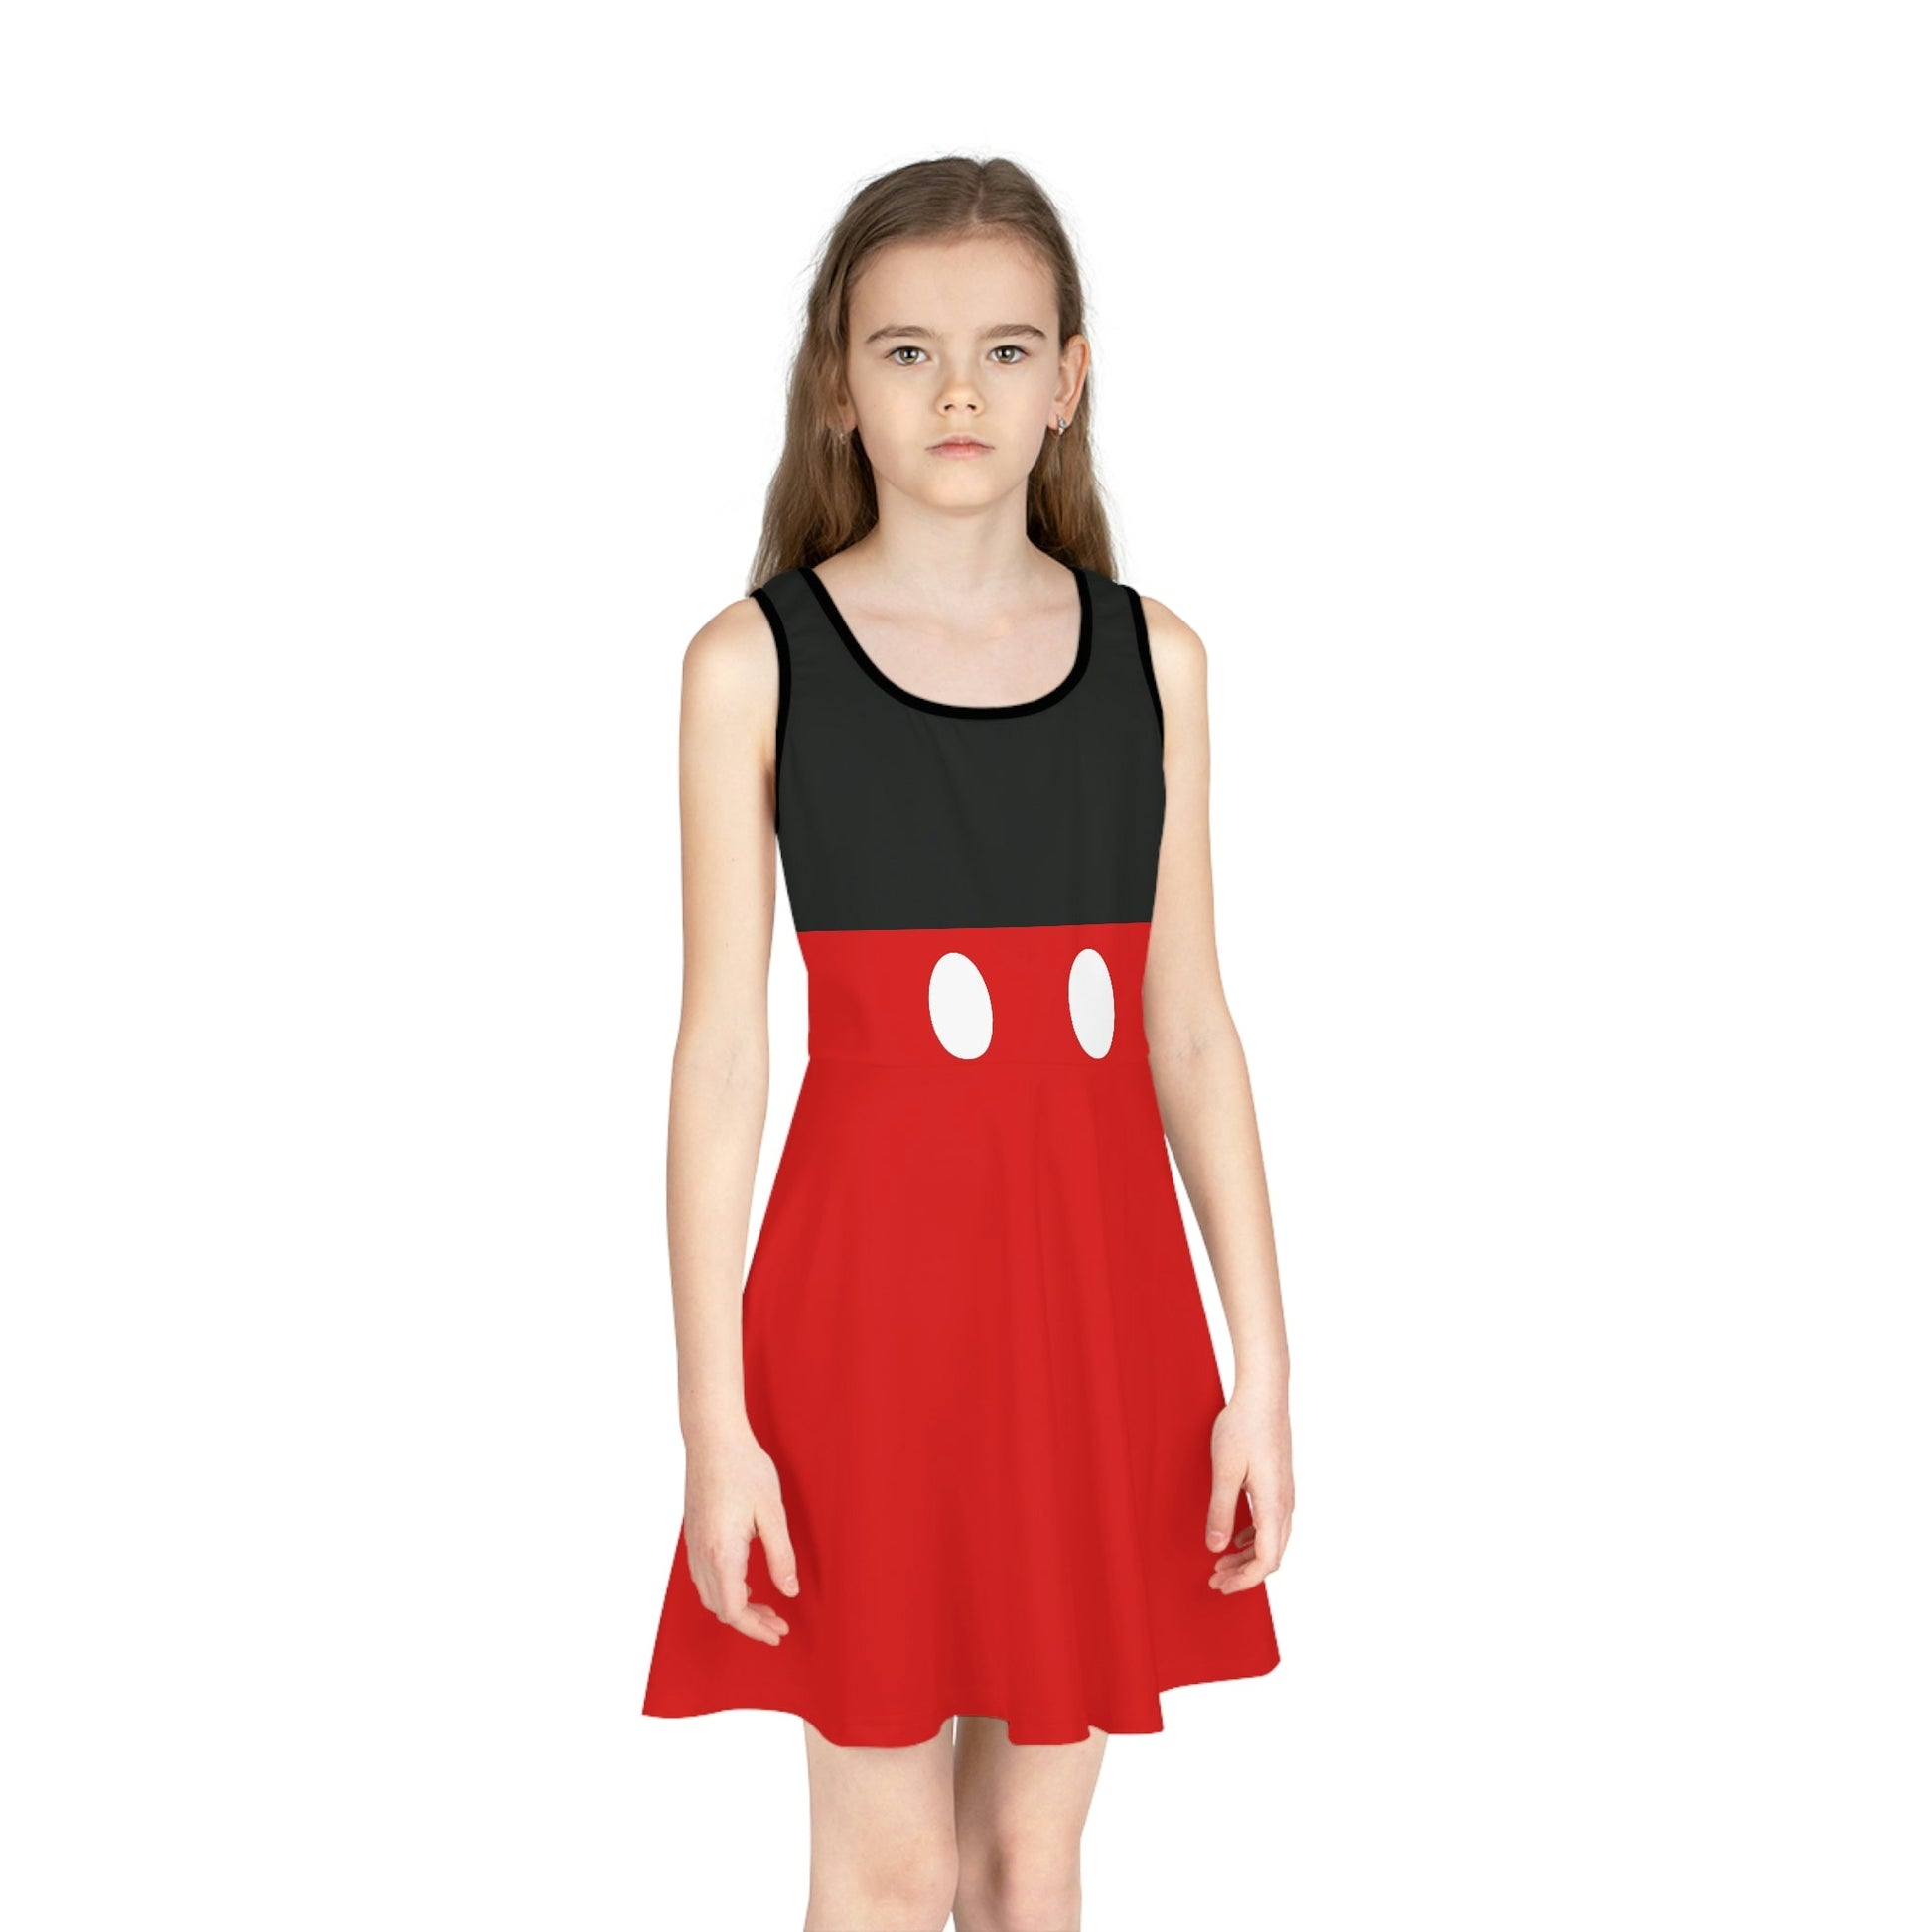 Oh Boy! Girls' Sleeveless Sundress All Over PrintAOPAOP Clothing#tag4##tag5##tag6#